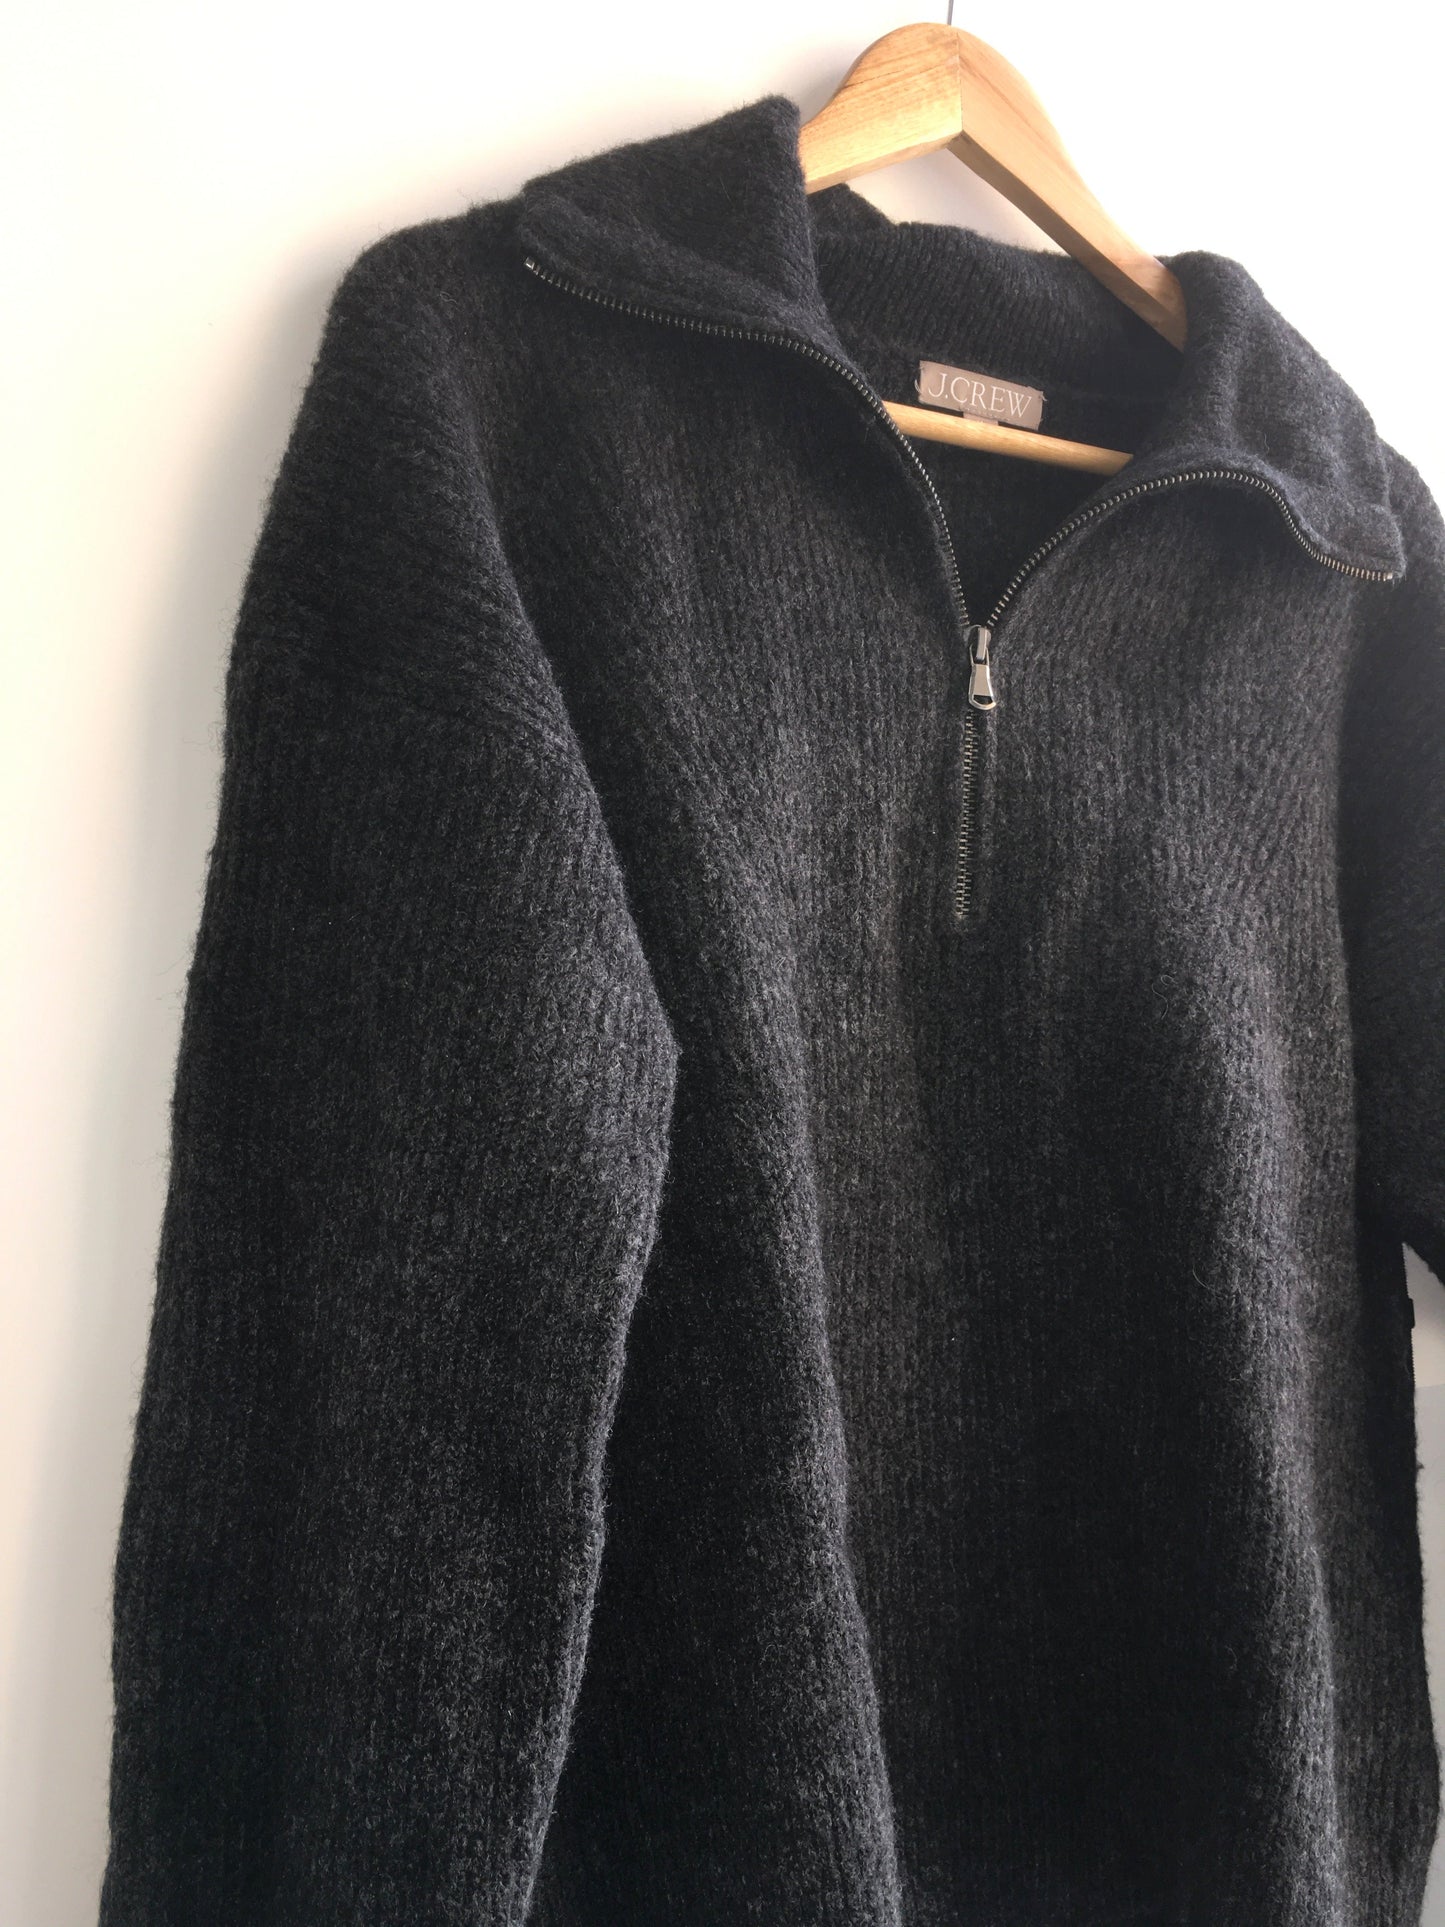 Sweater By J Crew  Size: M